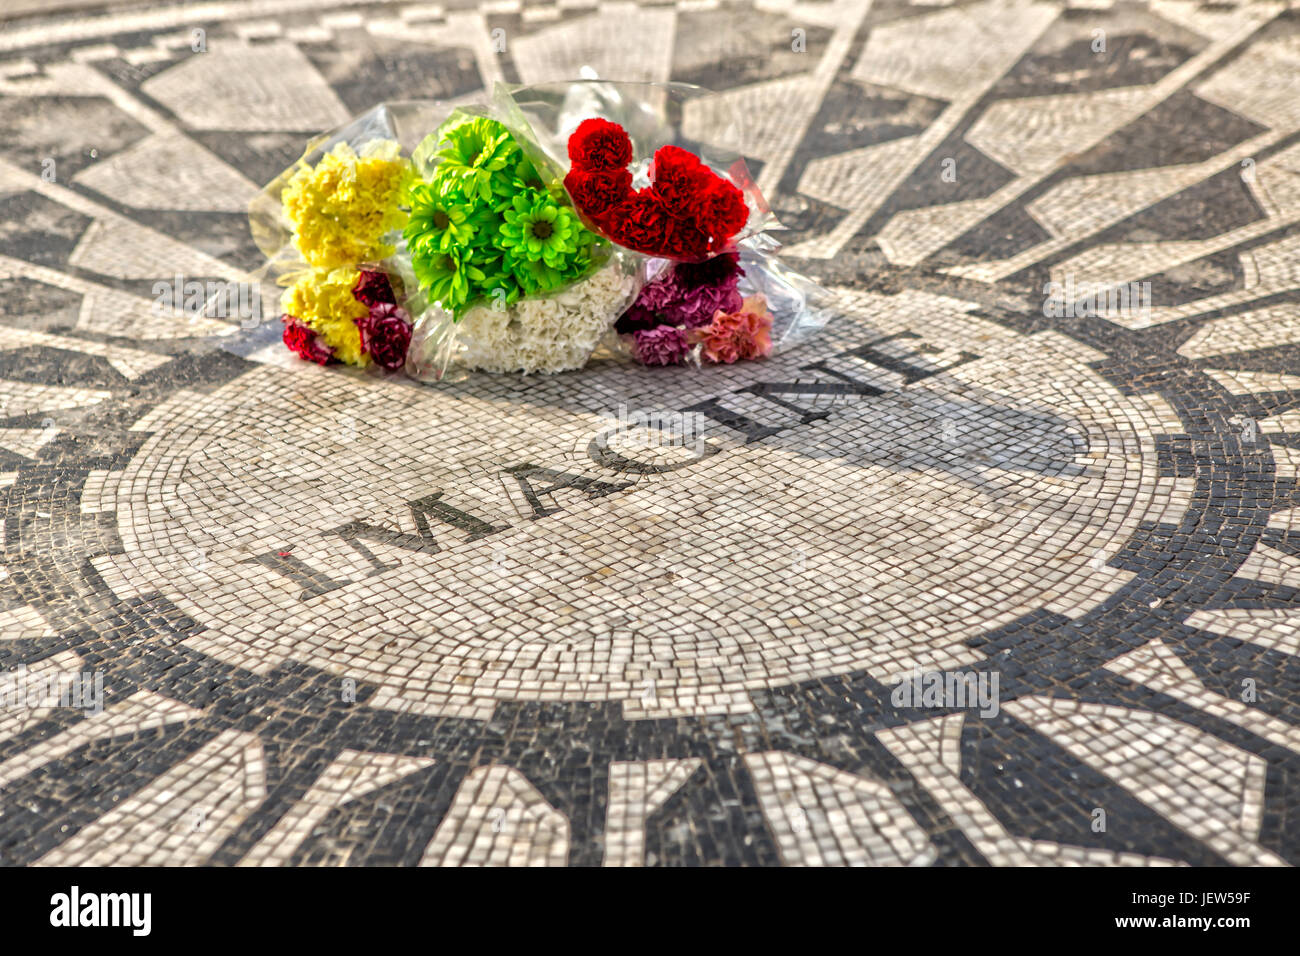 Imagine Strawberry Fields Central Park New York with Flowers Stock Photo